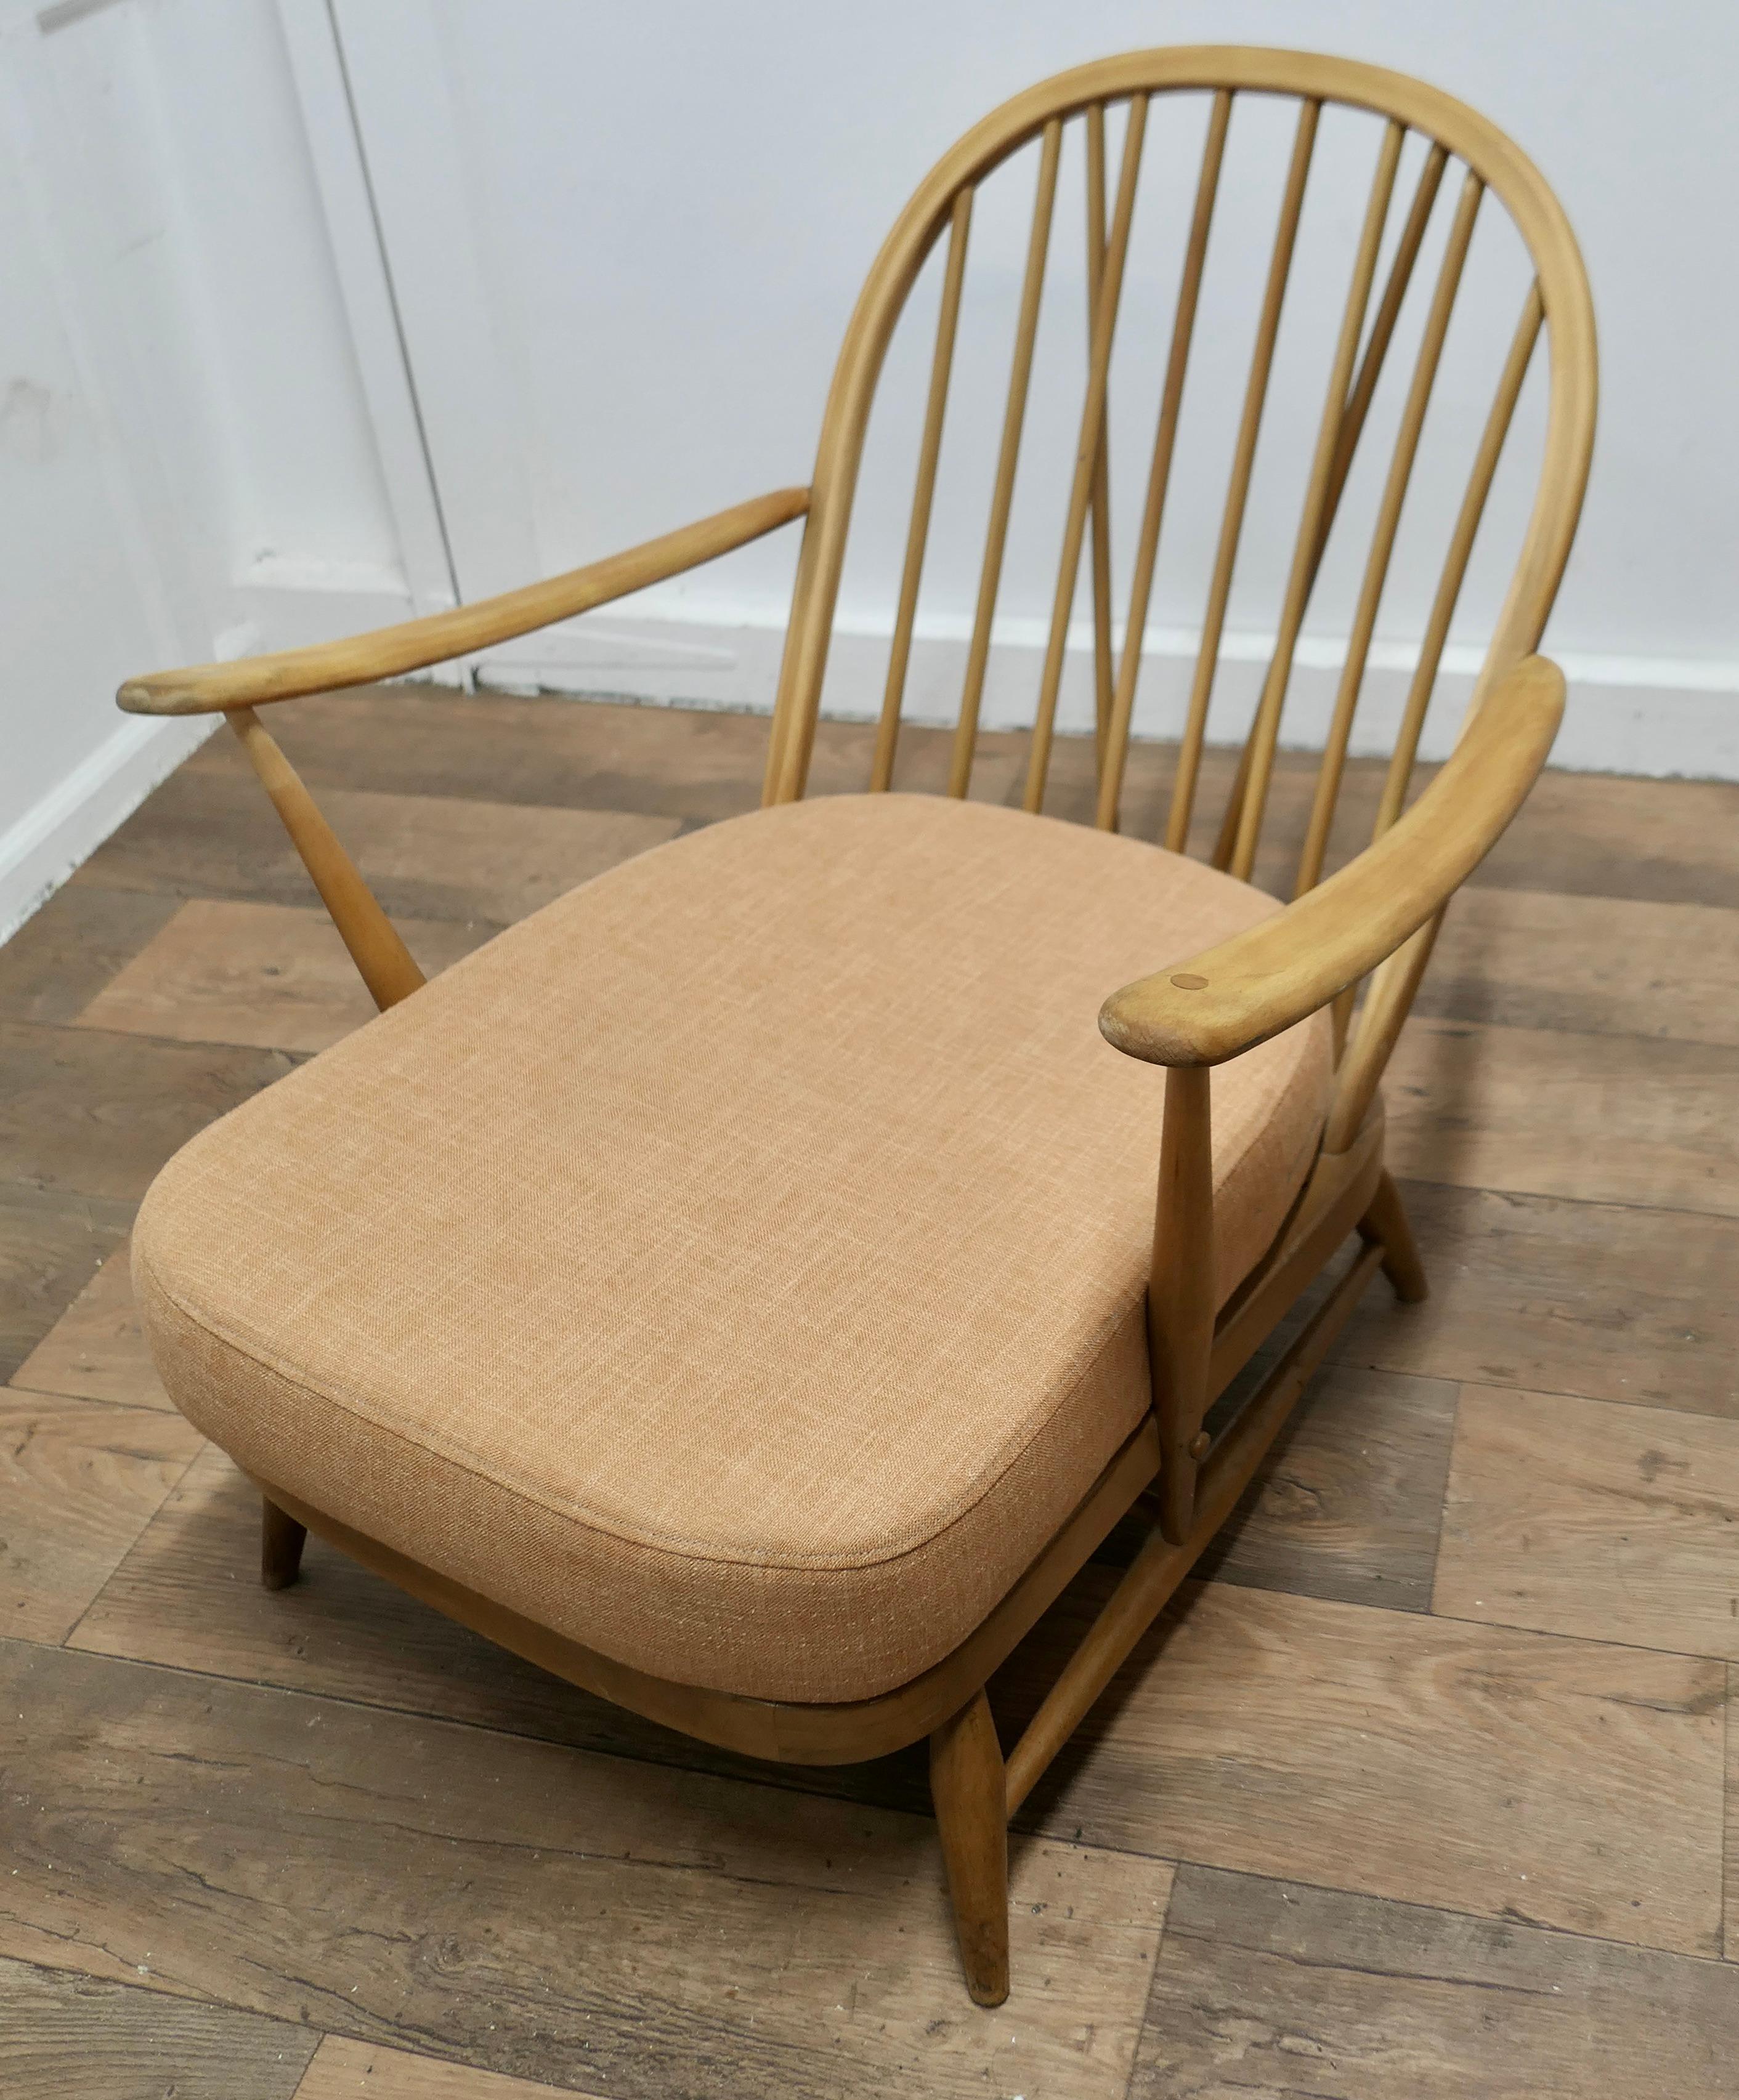 Mid-Century Modern Ercol Windsor Easy Chair   The chair is a classic design and traditionally made  For Sale